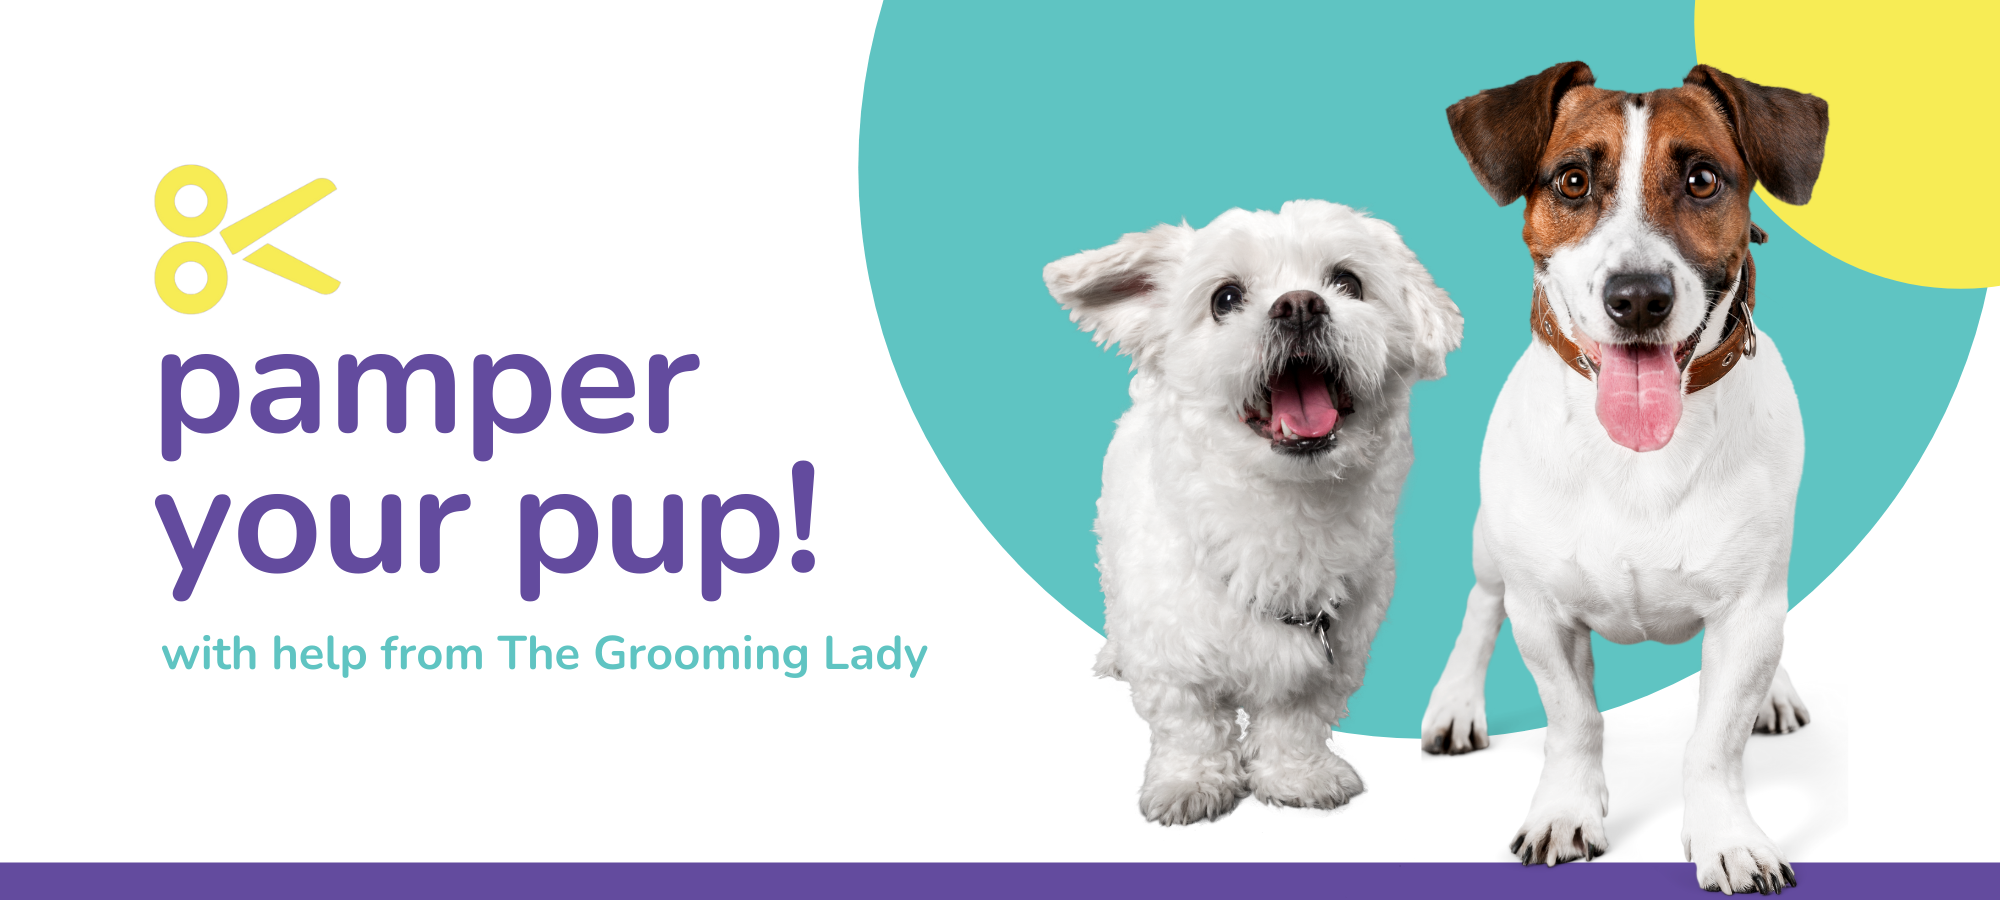 The Grooming Lady, LLC - Pet Grooming in Lincolnton, NC